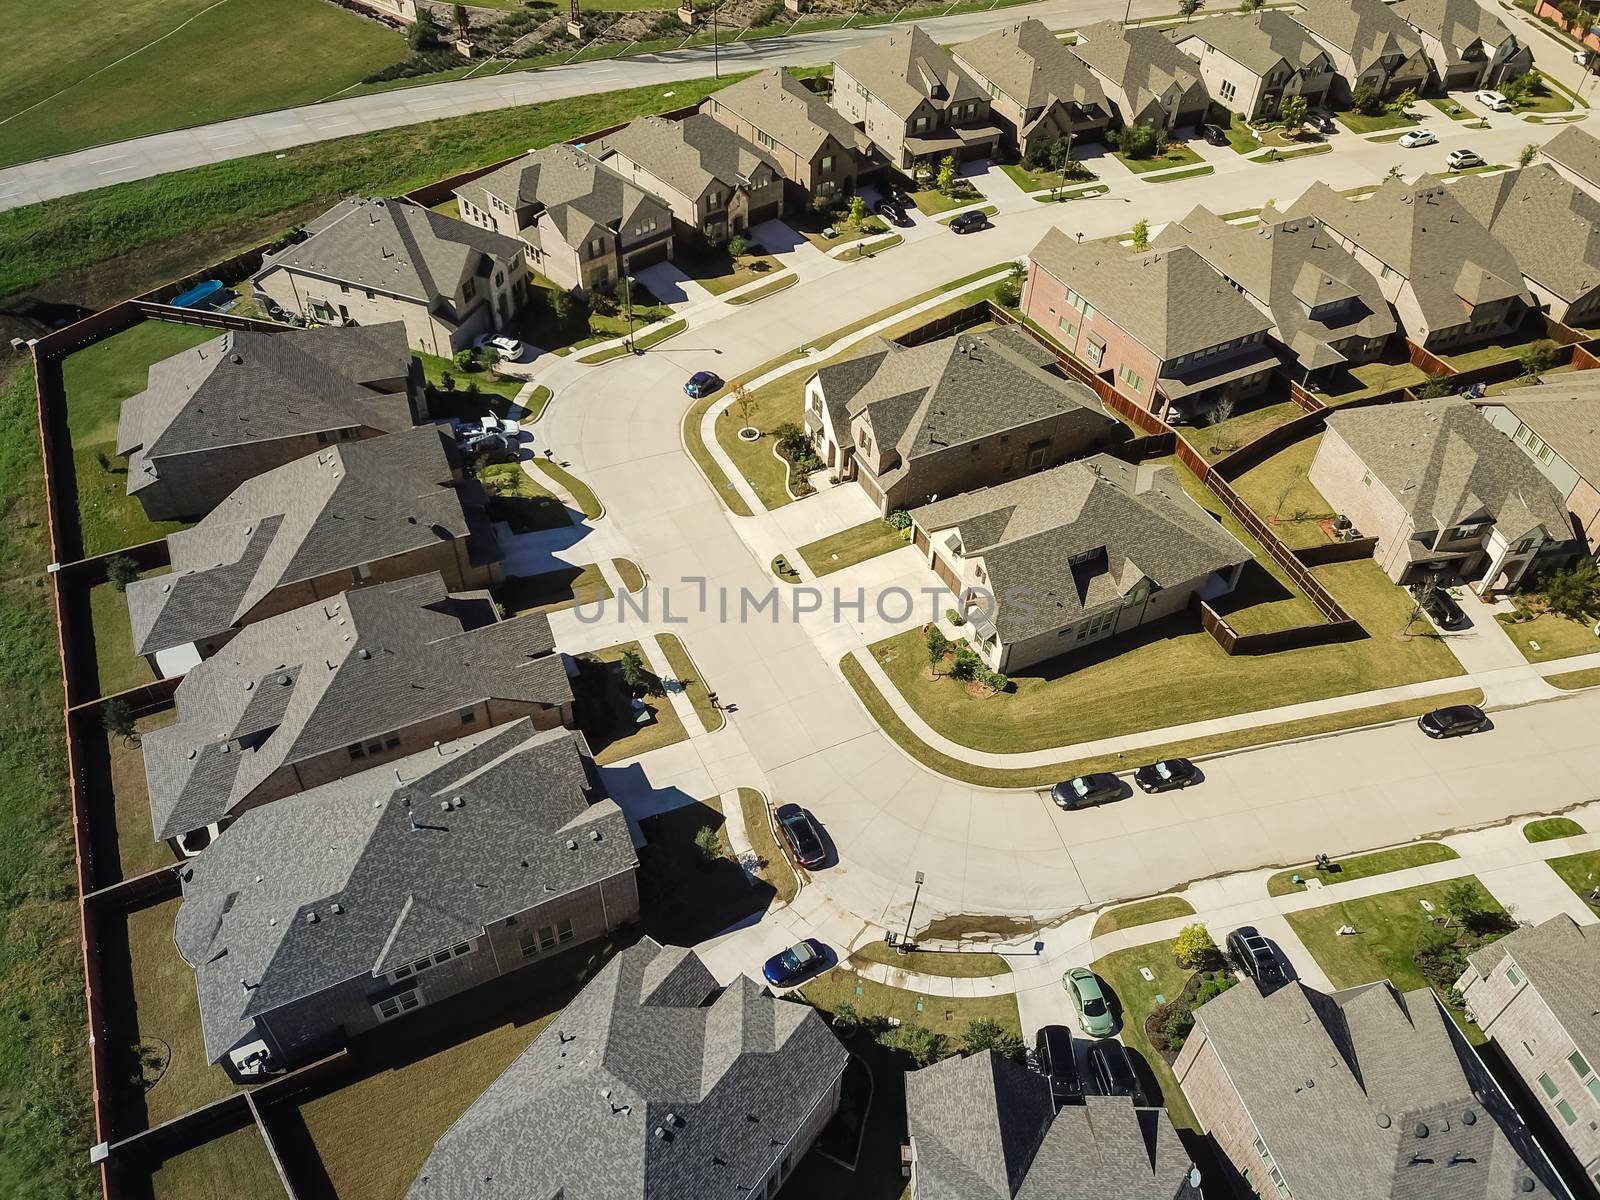 Aerial view new development community with row of detached single-family house and garden. Flyover residential area suburban Dallas, Texas, USA